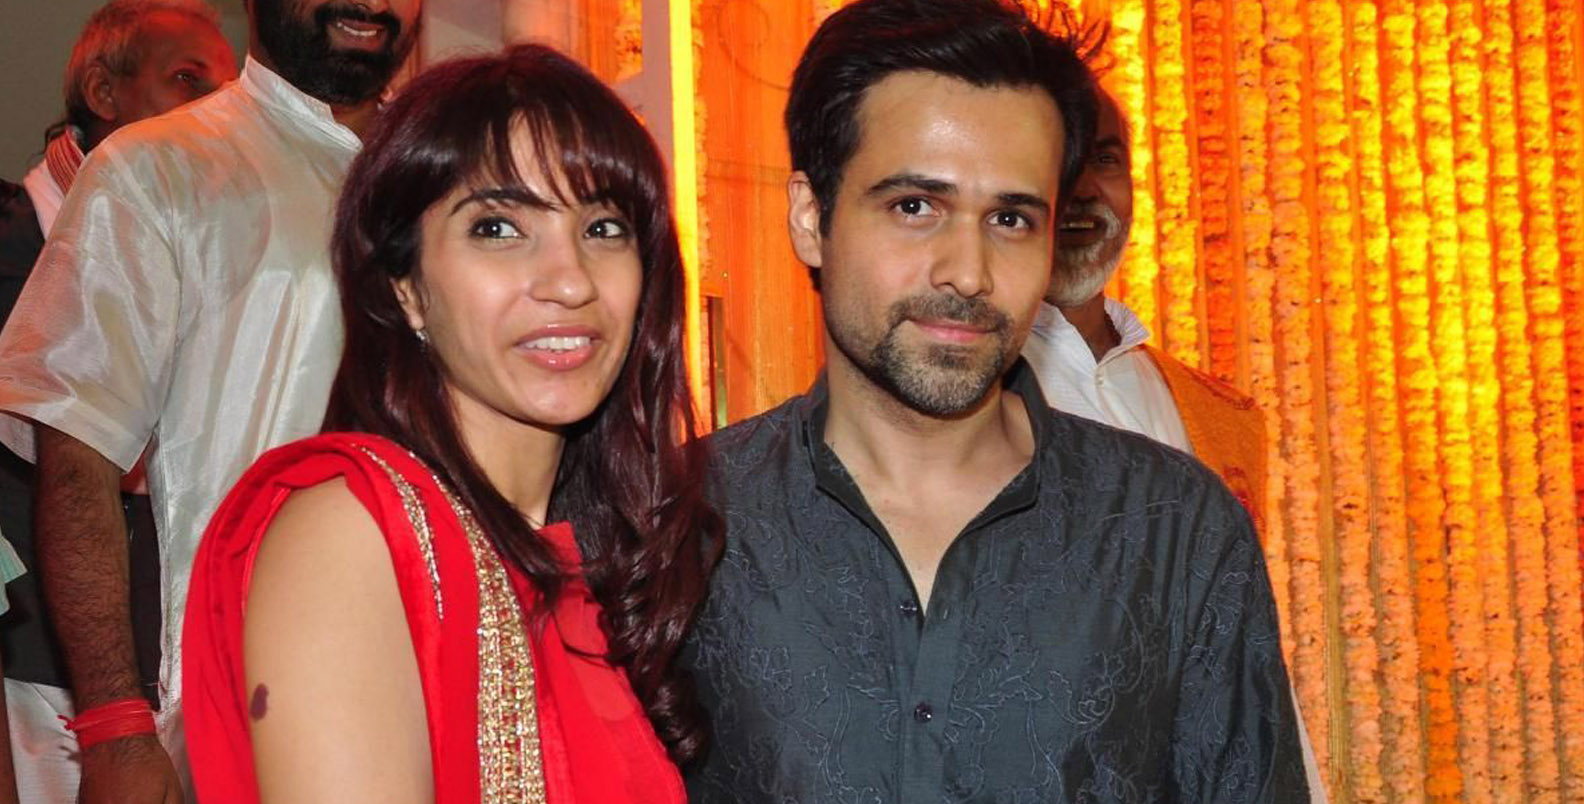 Emraan Hashmi S Wife Upset Over His On Screen Kisses Jfw Just For Women Movie stills images, ,emraan hashmi wife kiss gallery wallpapers previews. wife upset over his on screen kisses